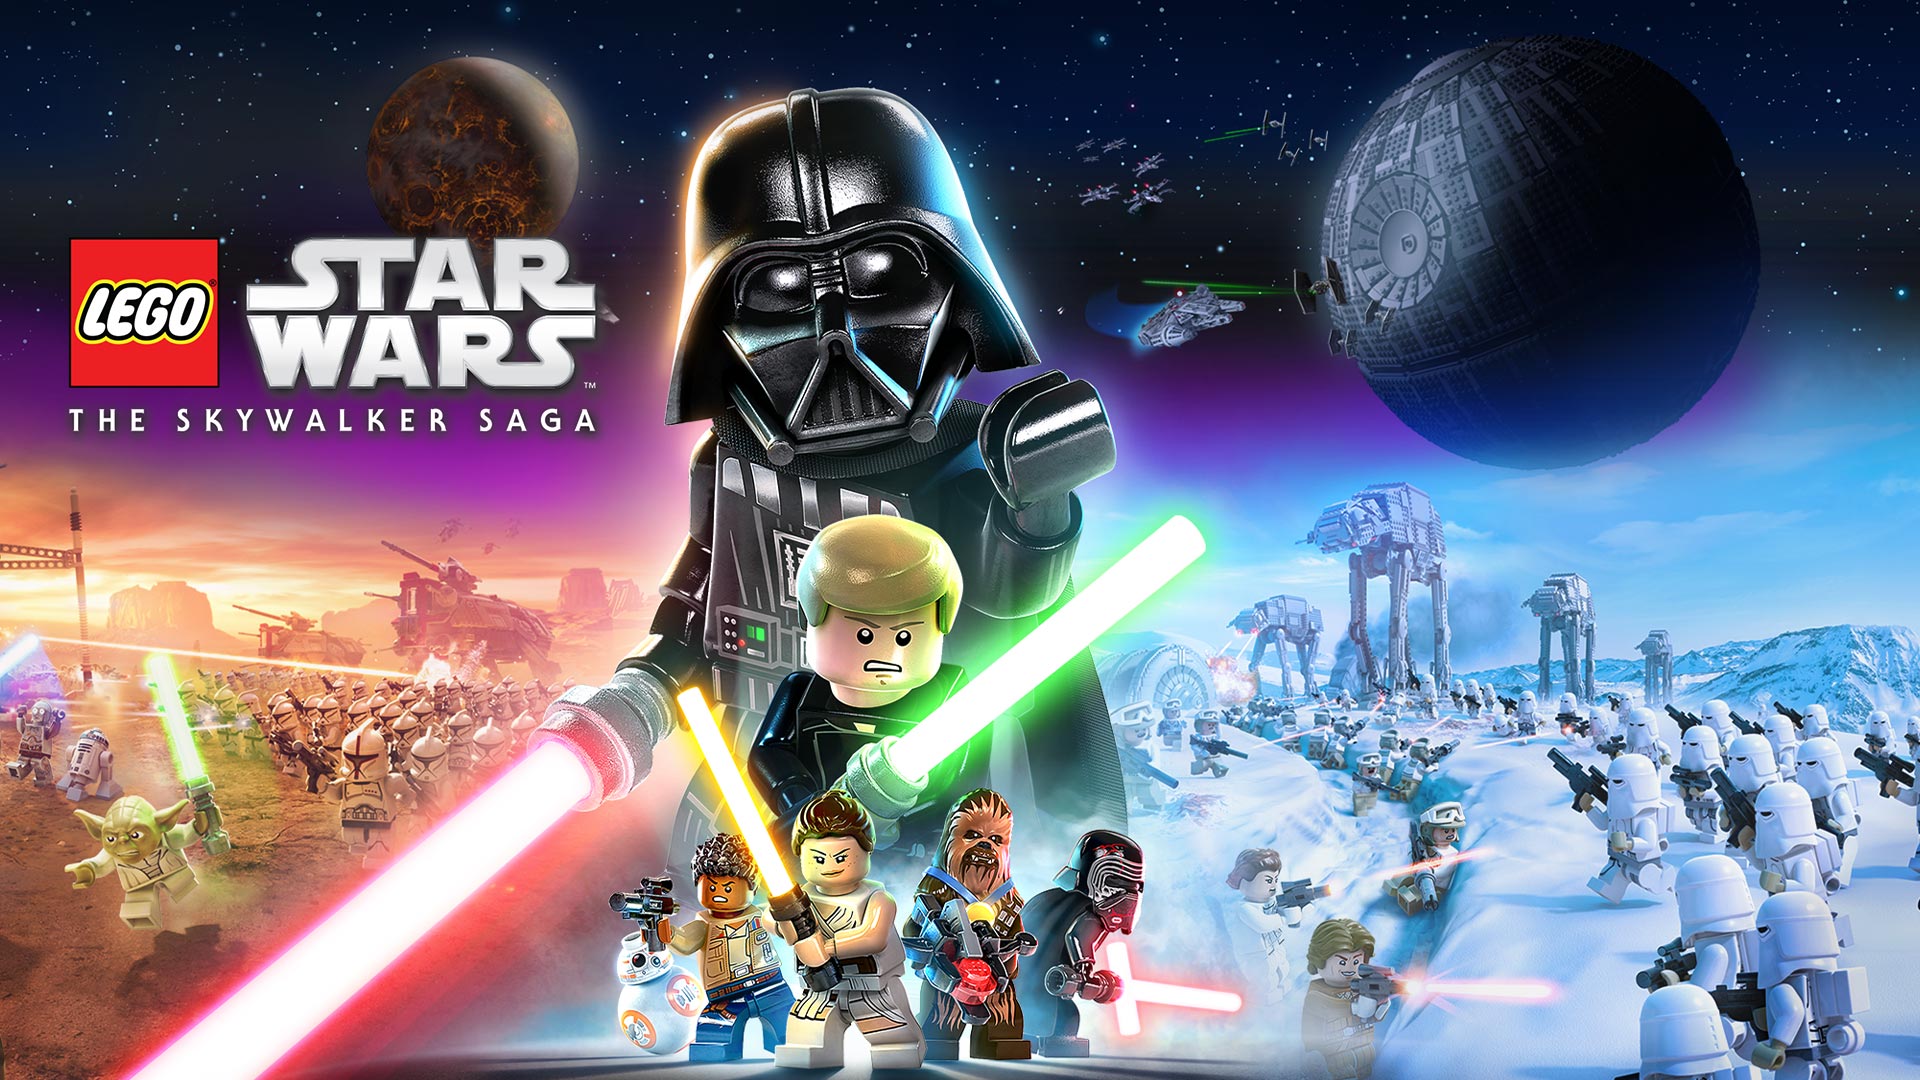 Lego Star Wars The Skywalker Saga release date, trailers, news and